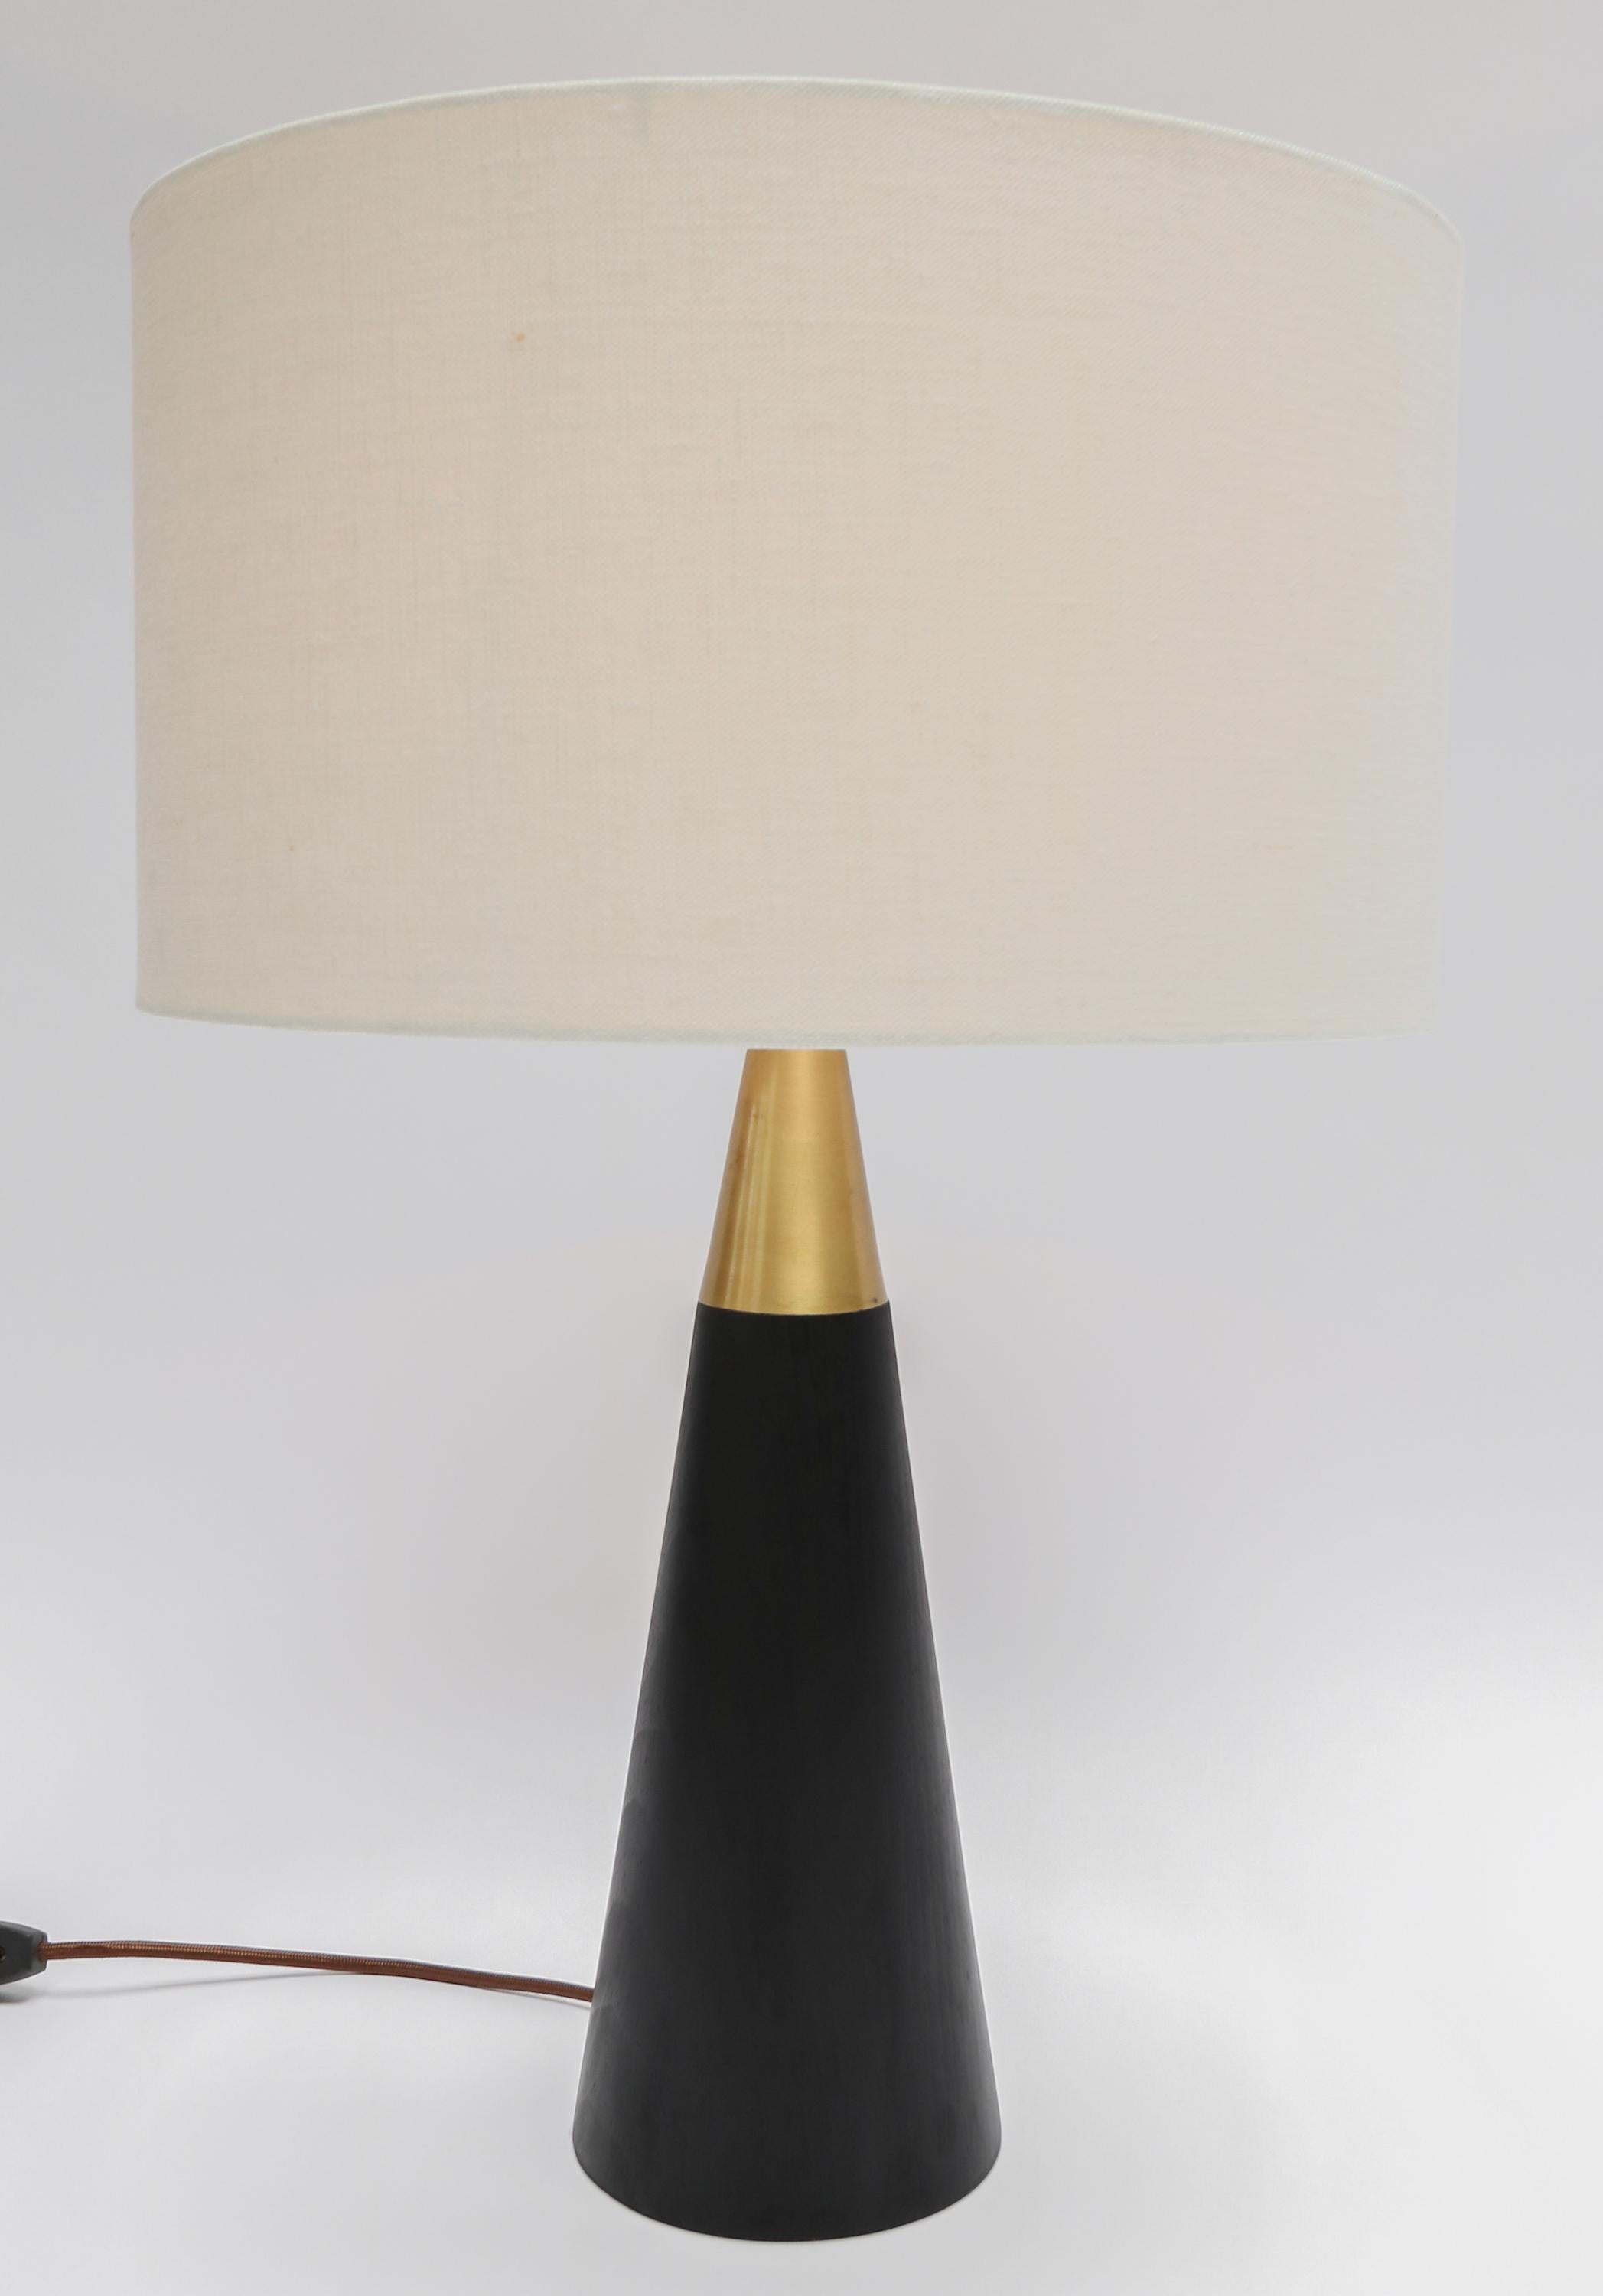 Custom Brass and Black Table Lamp with Ivory Linen Shade by Adesso Imports For Sale 1